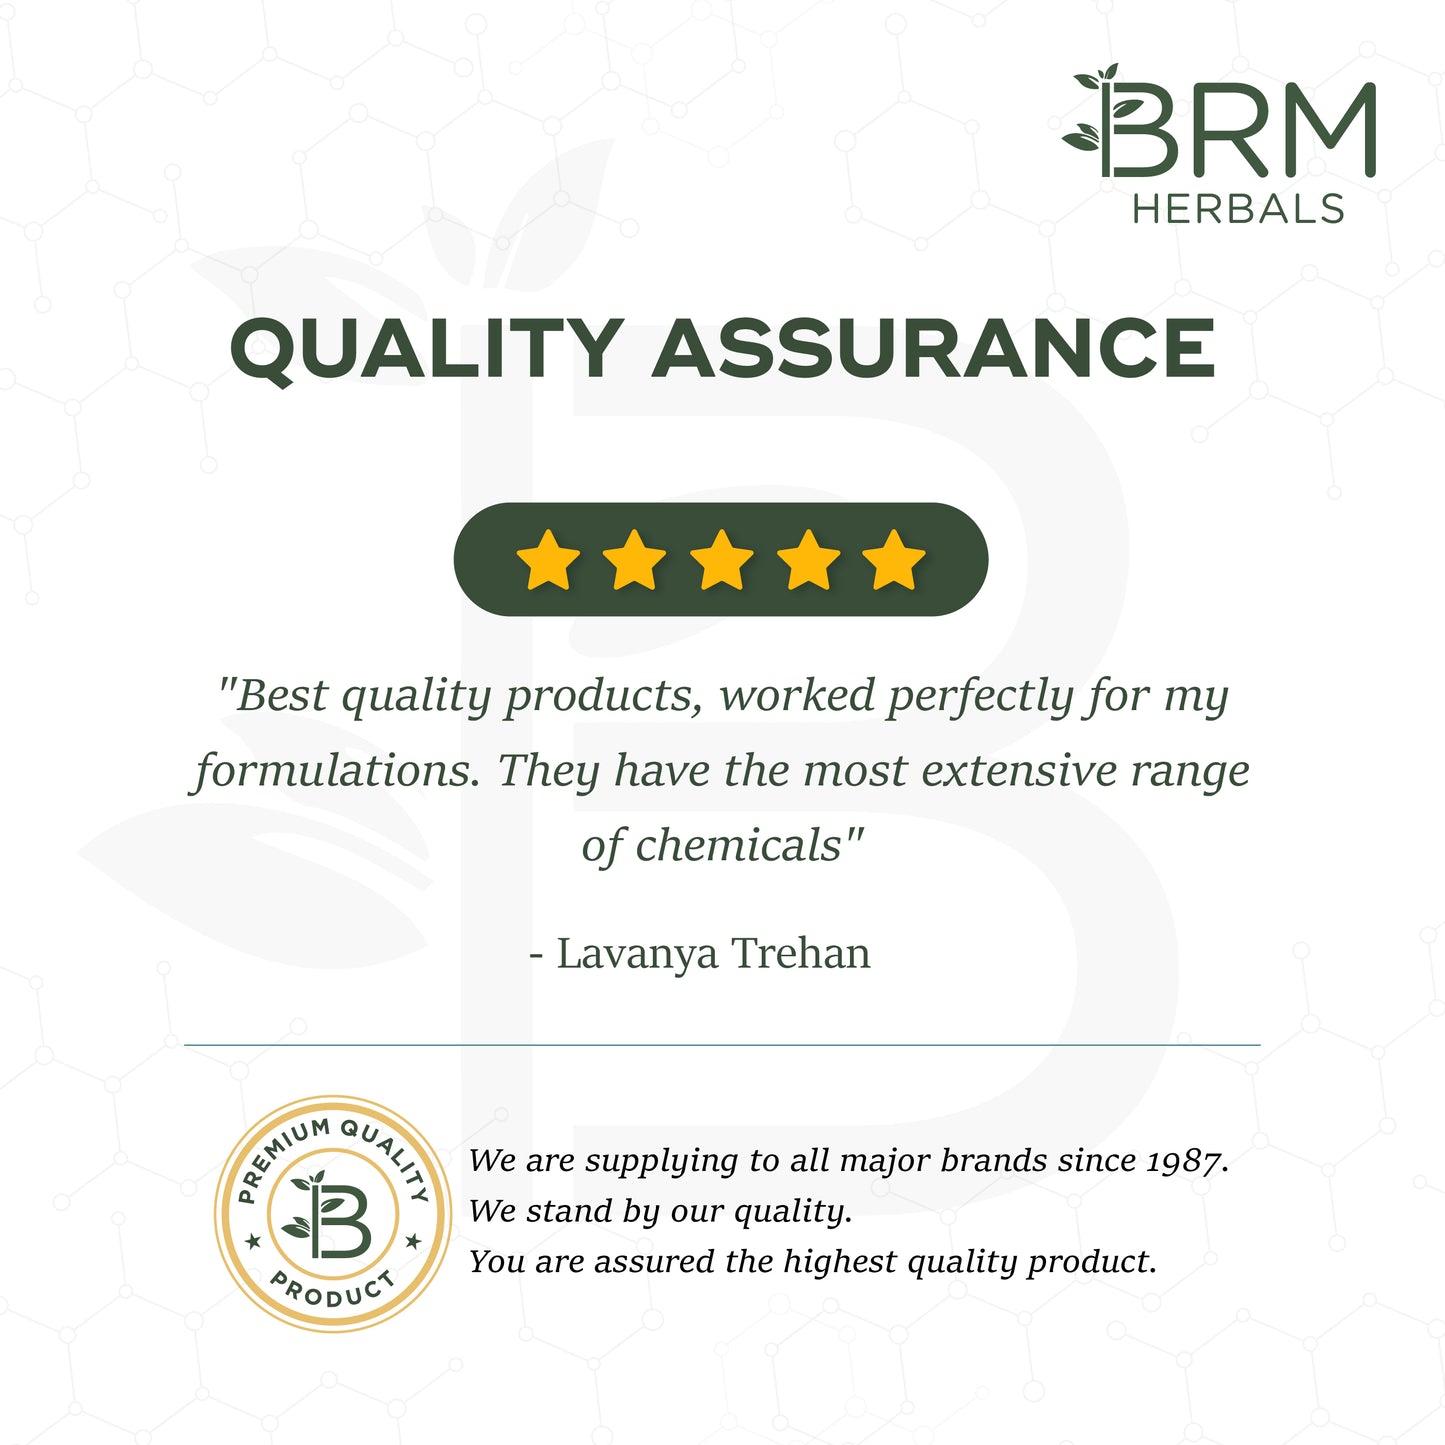 brm chemicalss' poster for quality assurance product